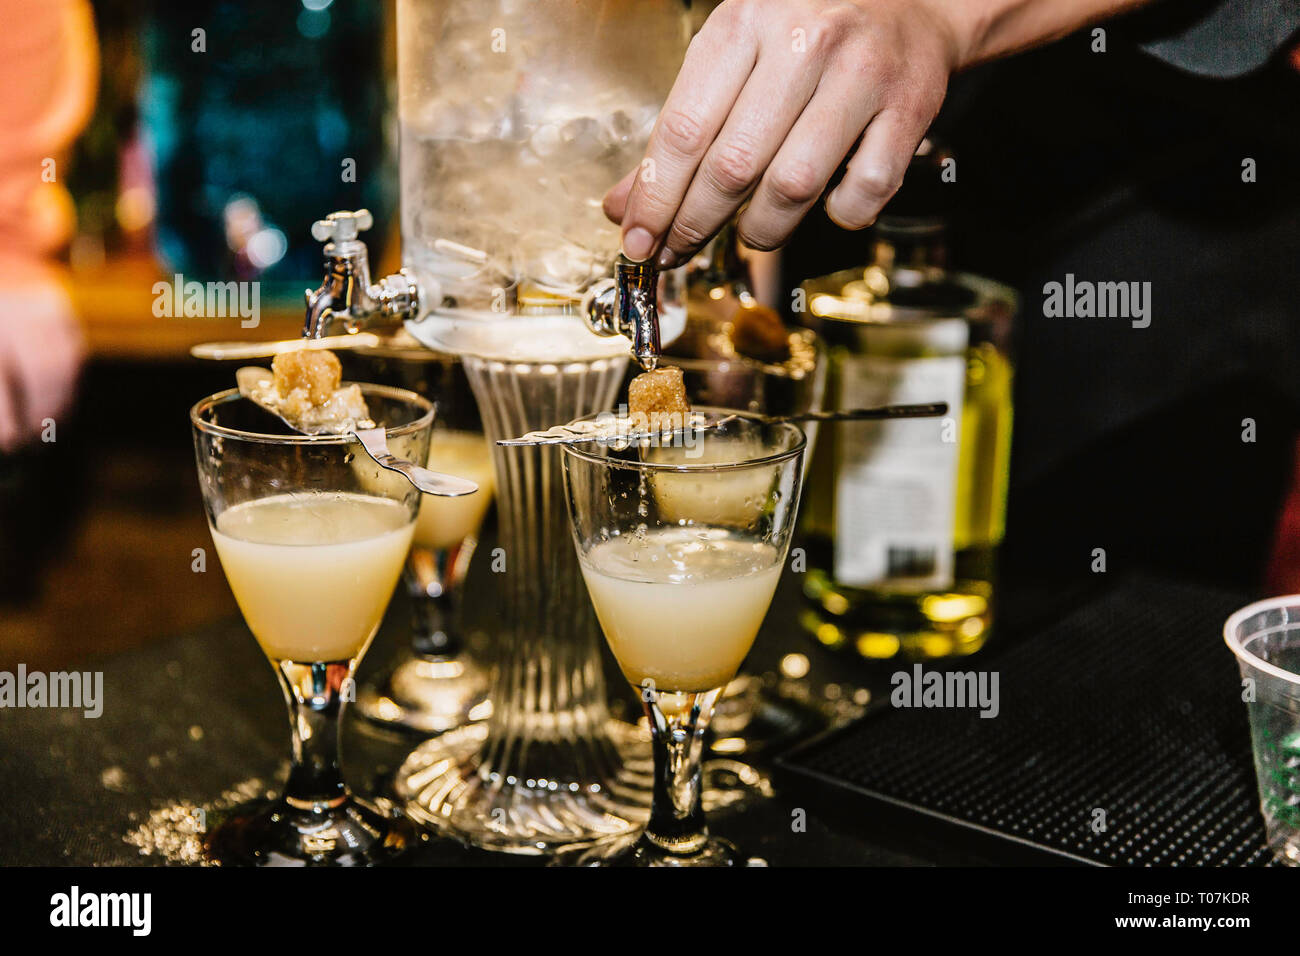 A bartender preparing cocktails mixed with absinthe at an event Stock Photo